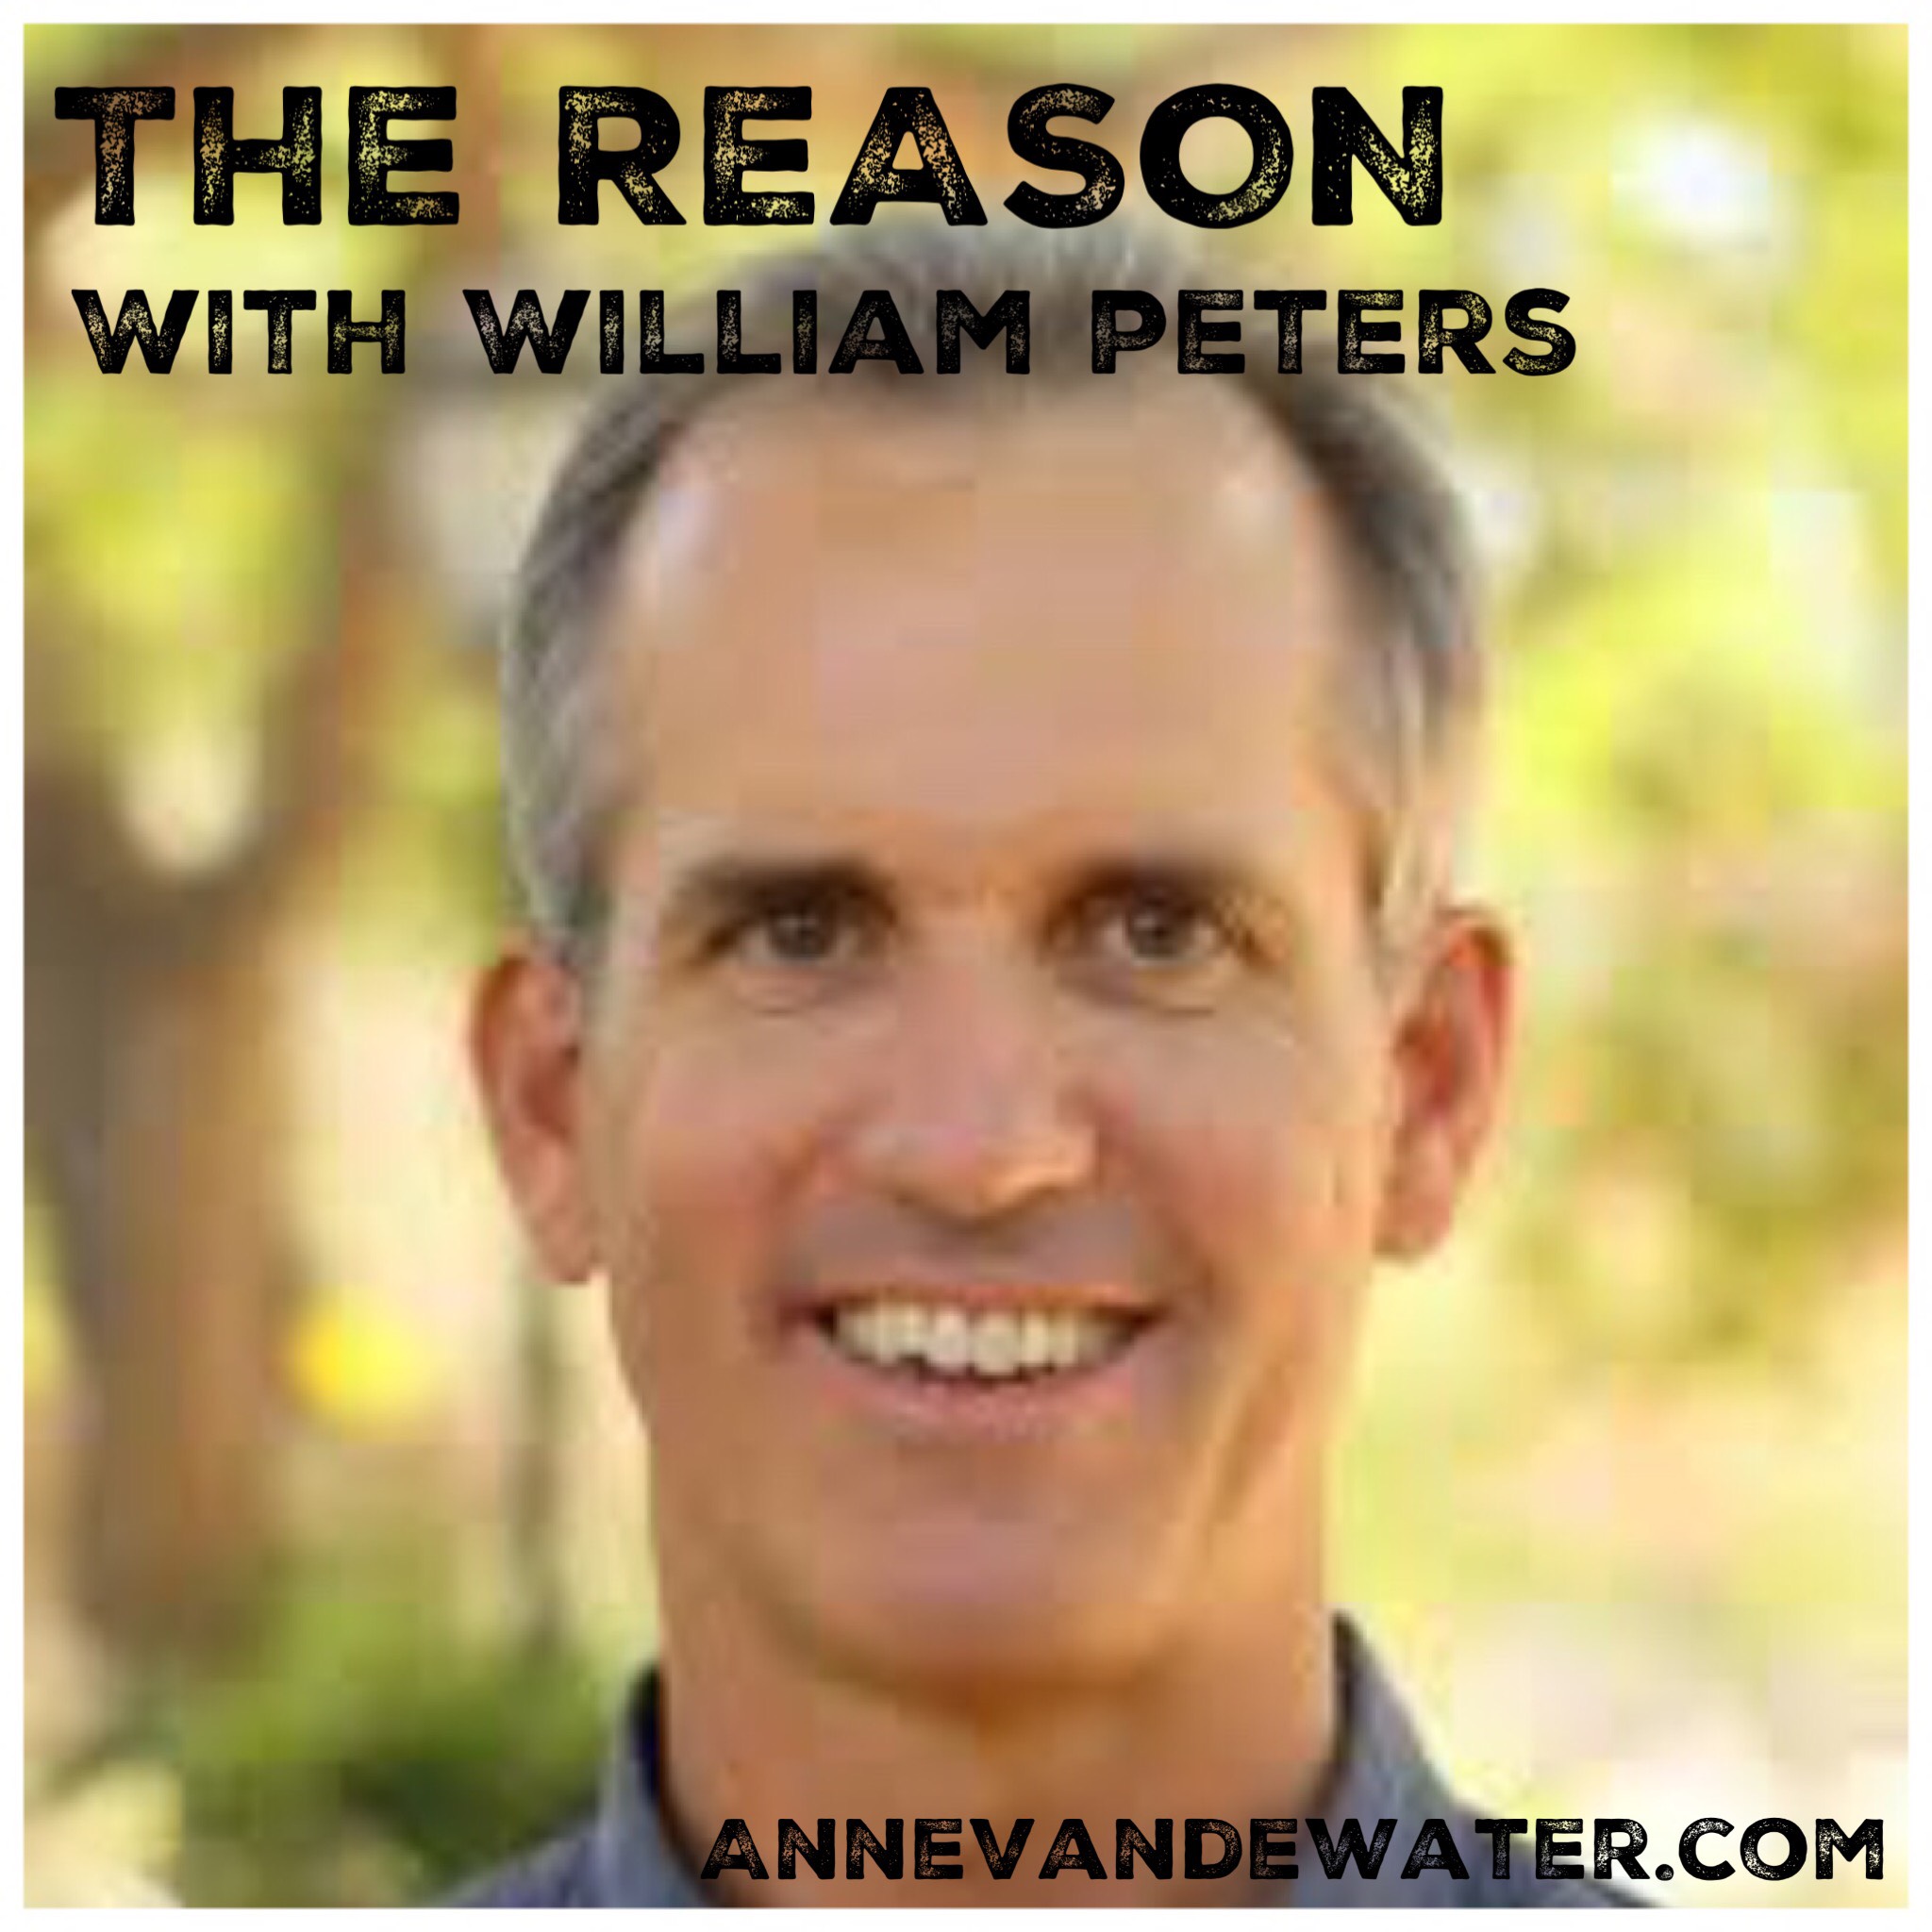 THE REASON INTERVIEW with William Peters